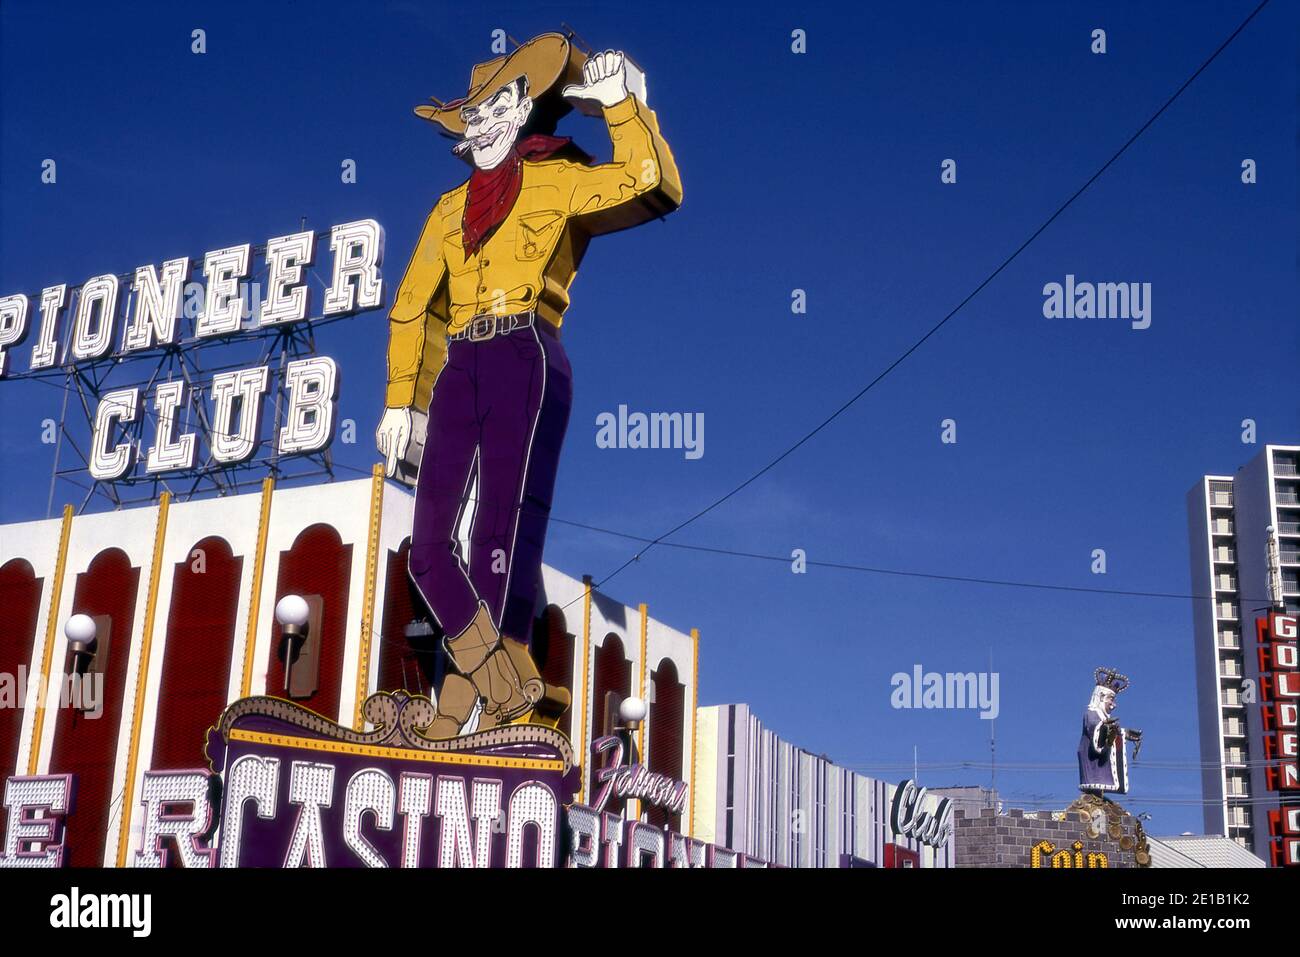 Neon cowboy sign at the Pioneer Club Casino on Fremont Street in Las Vegas, Nevada circa 1970s Stock Photo